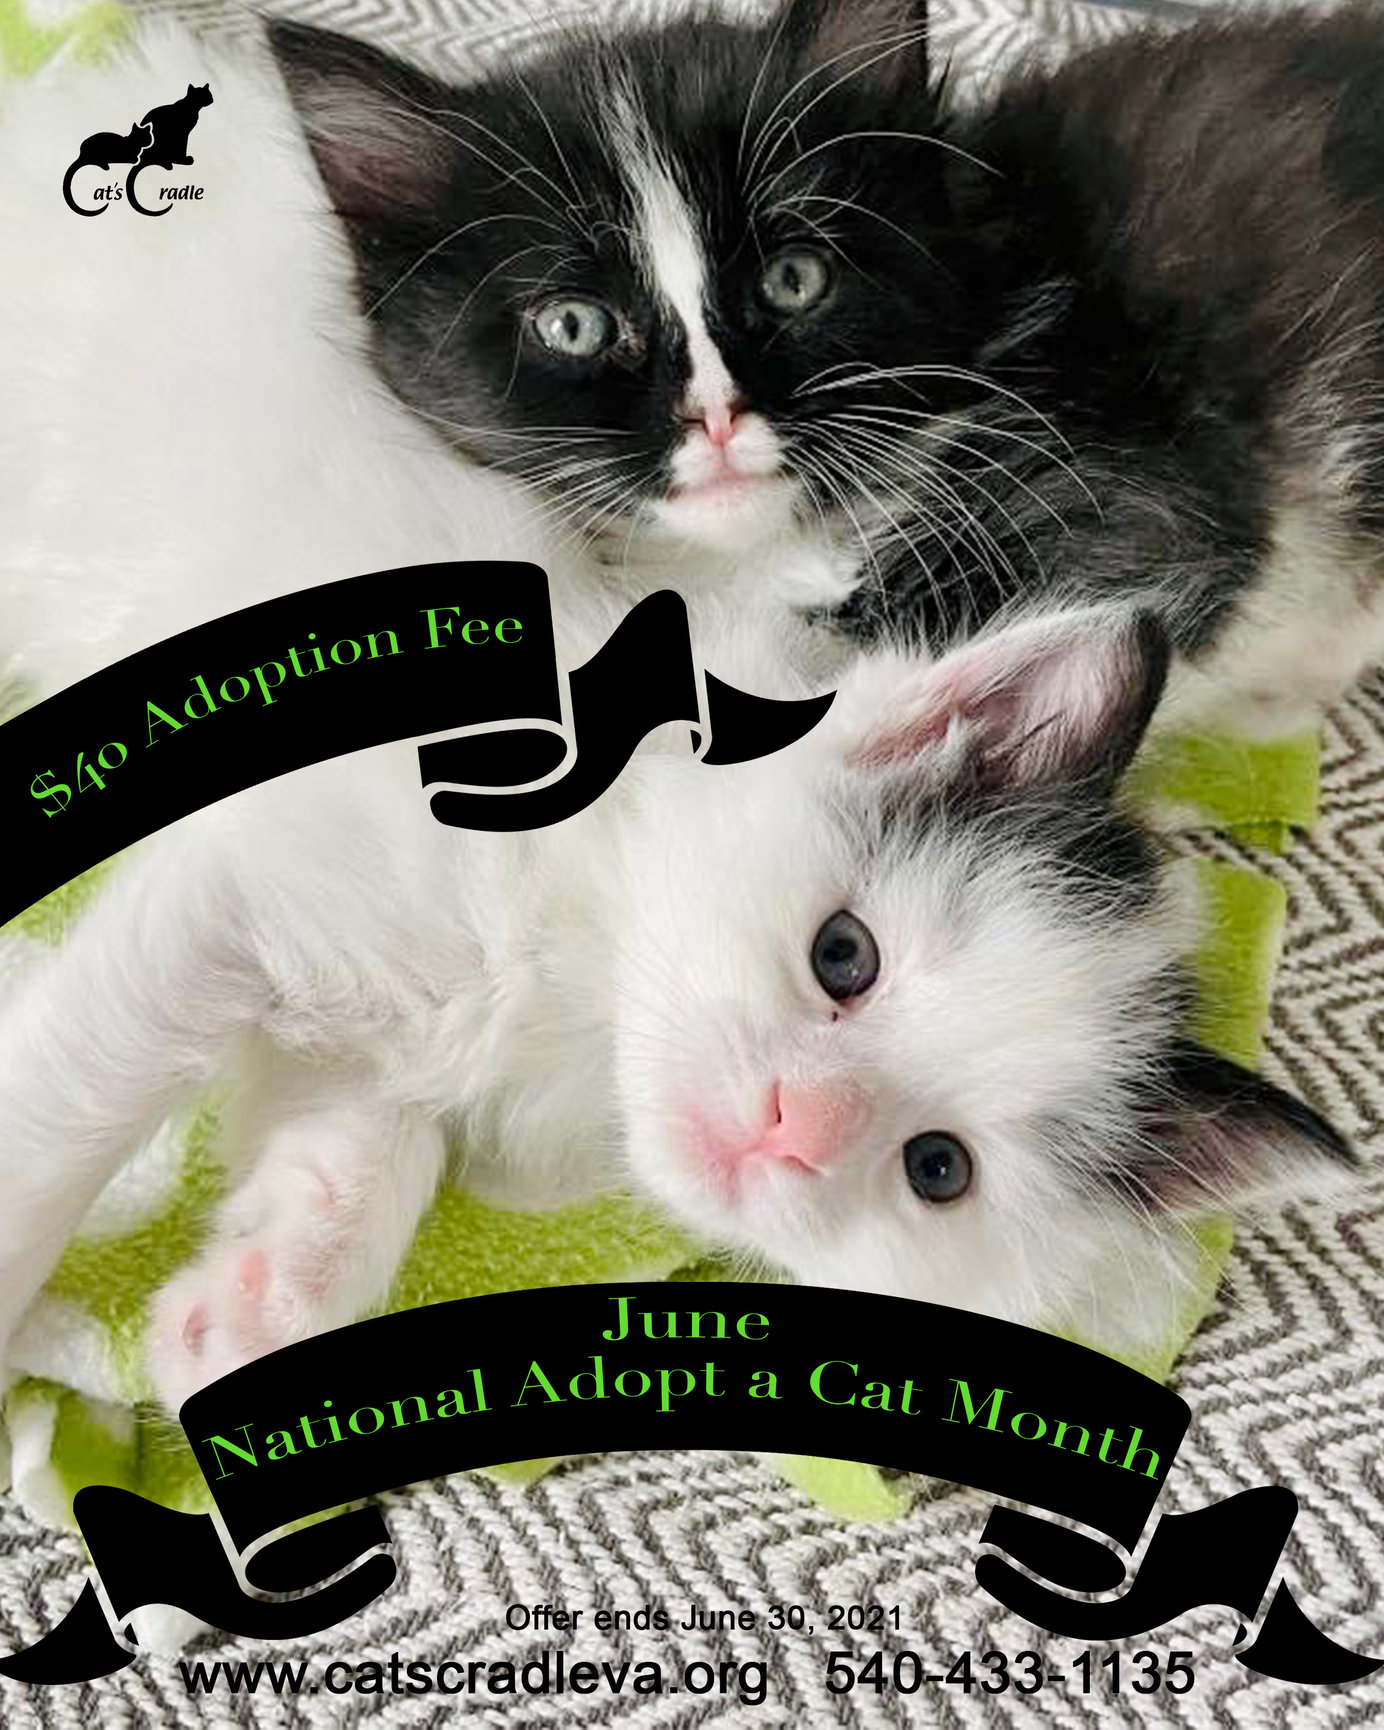 June is National Adopt a Cat Month Cat's Cradle